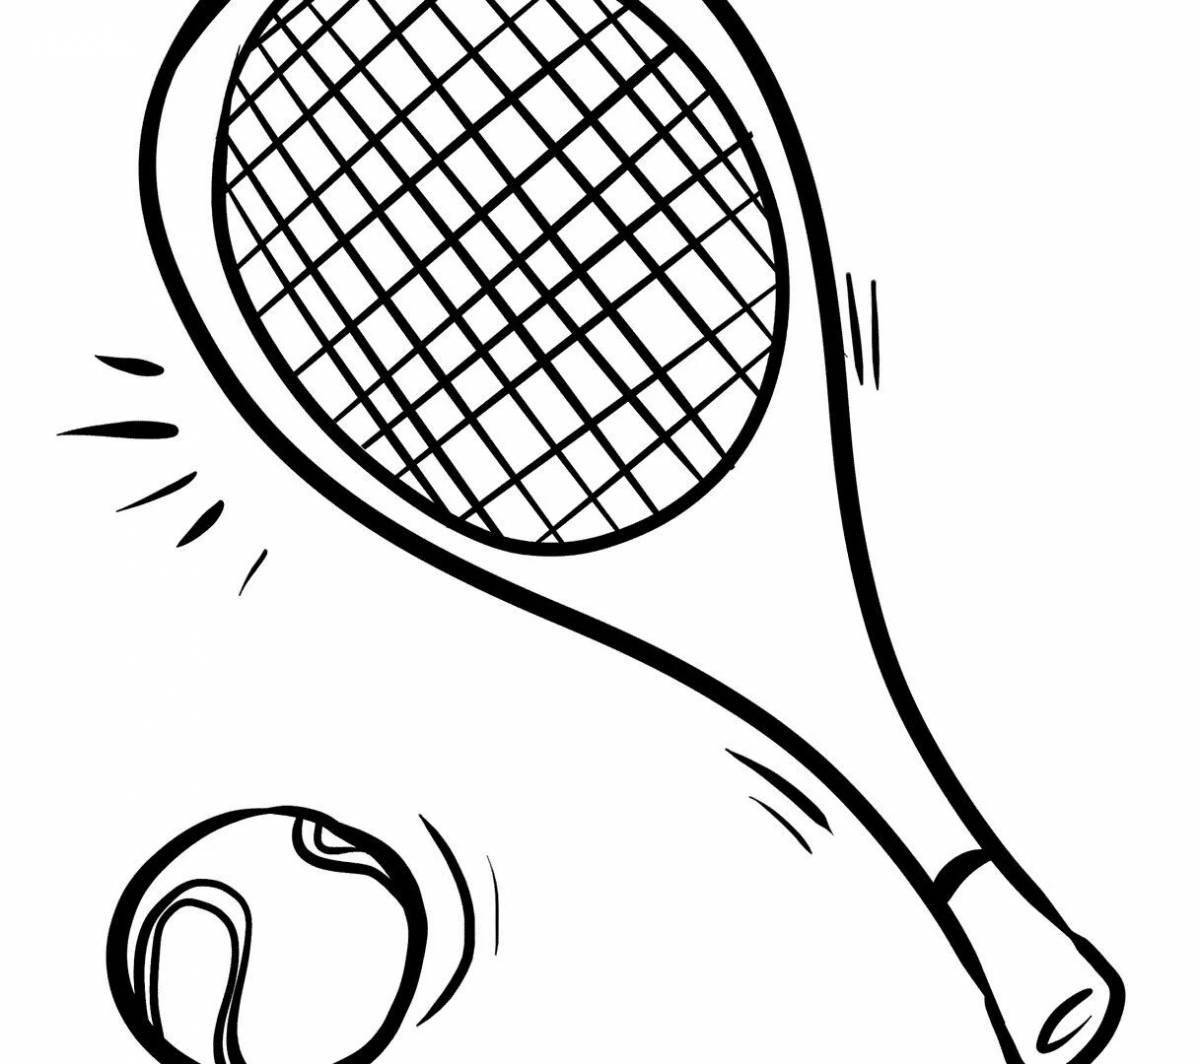 Playful tennis racket coloring page